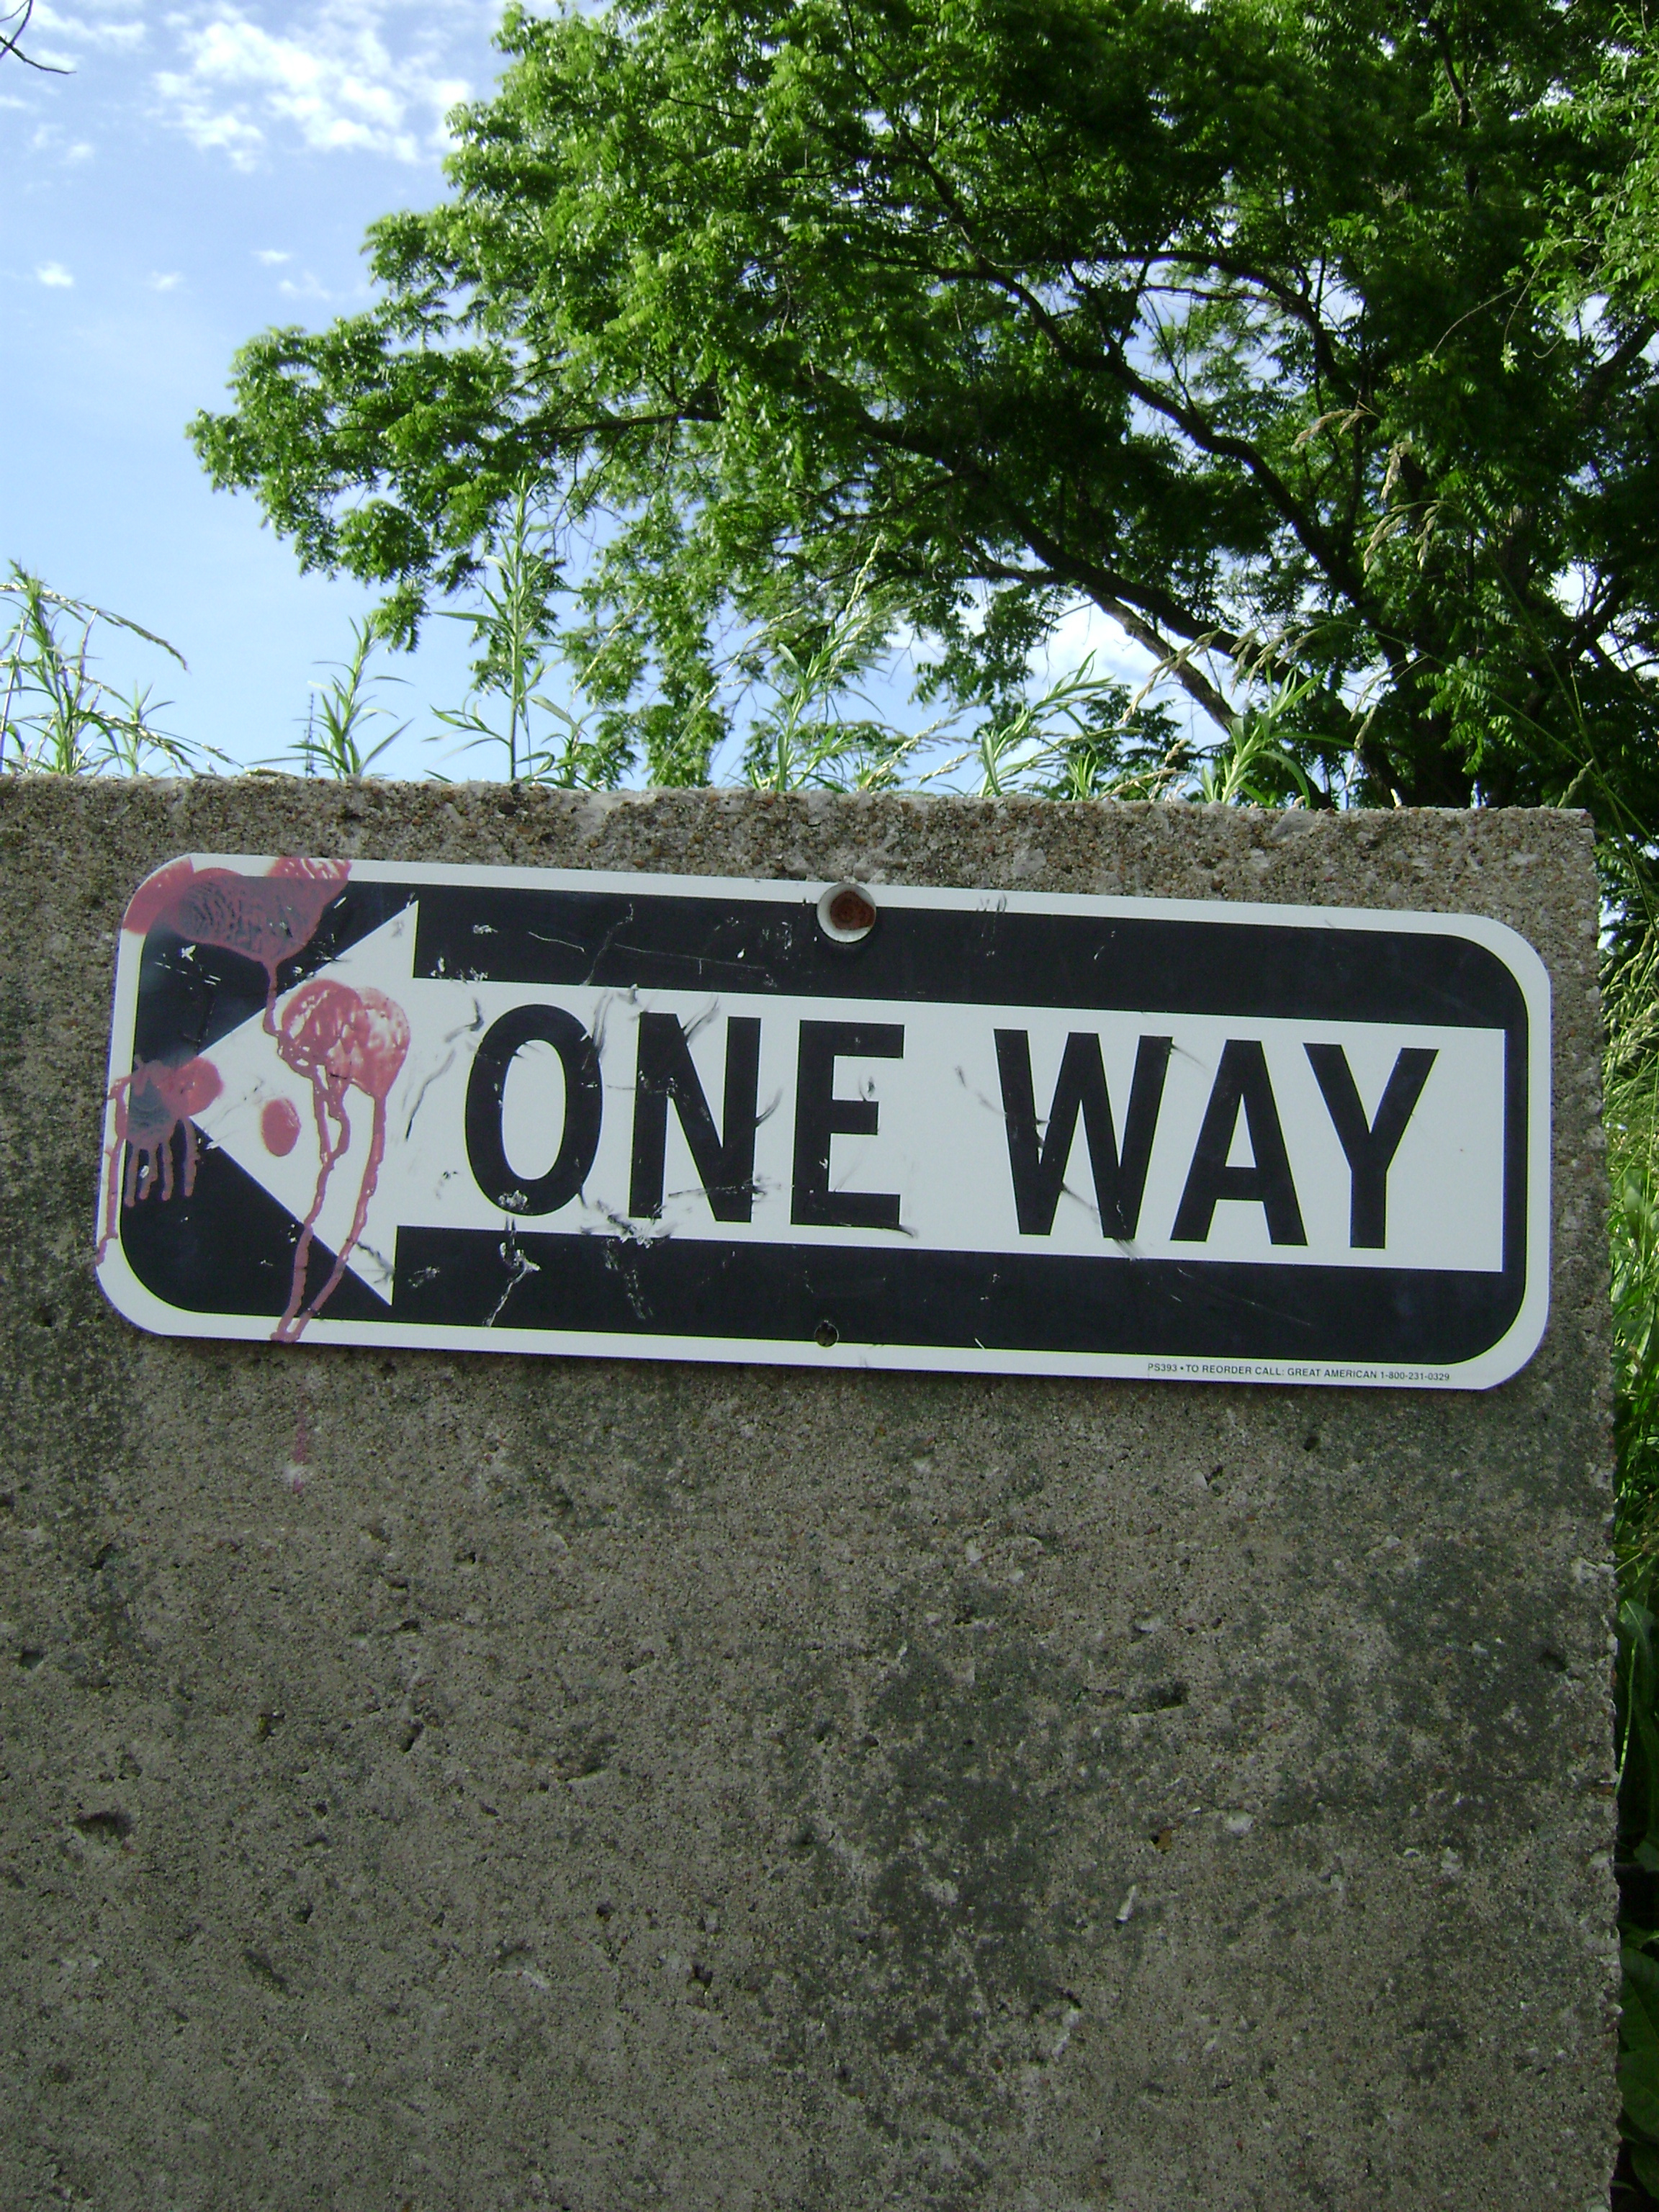 One way (with paintballs) photo